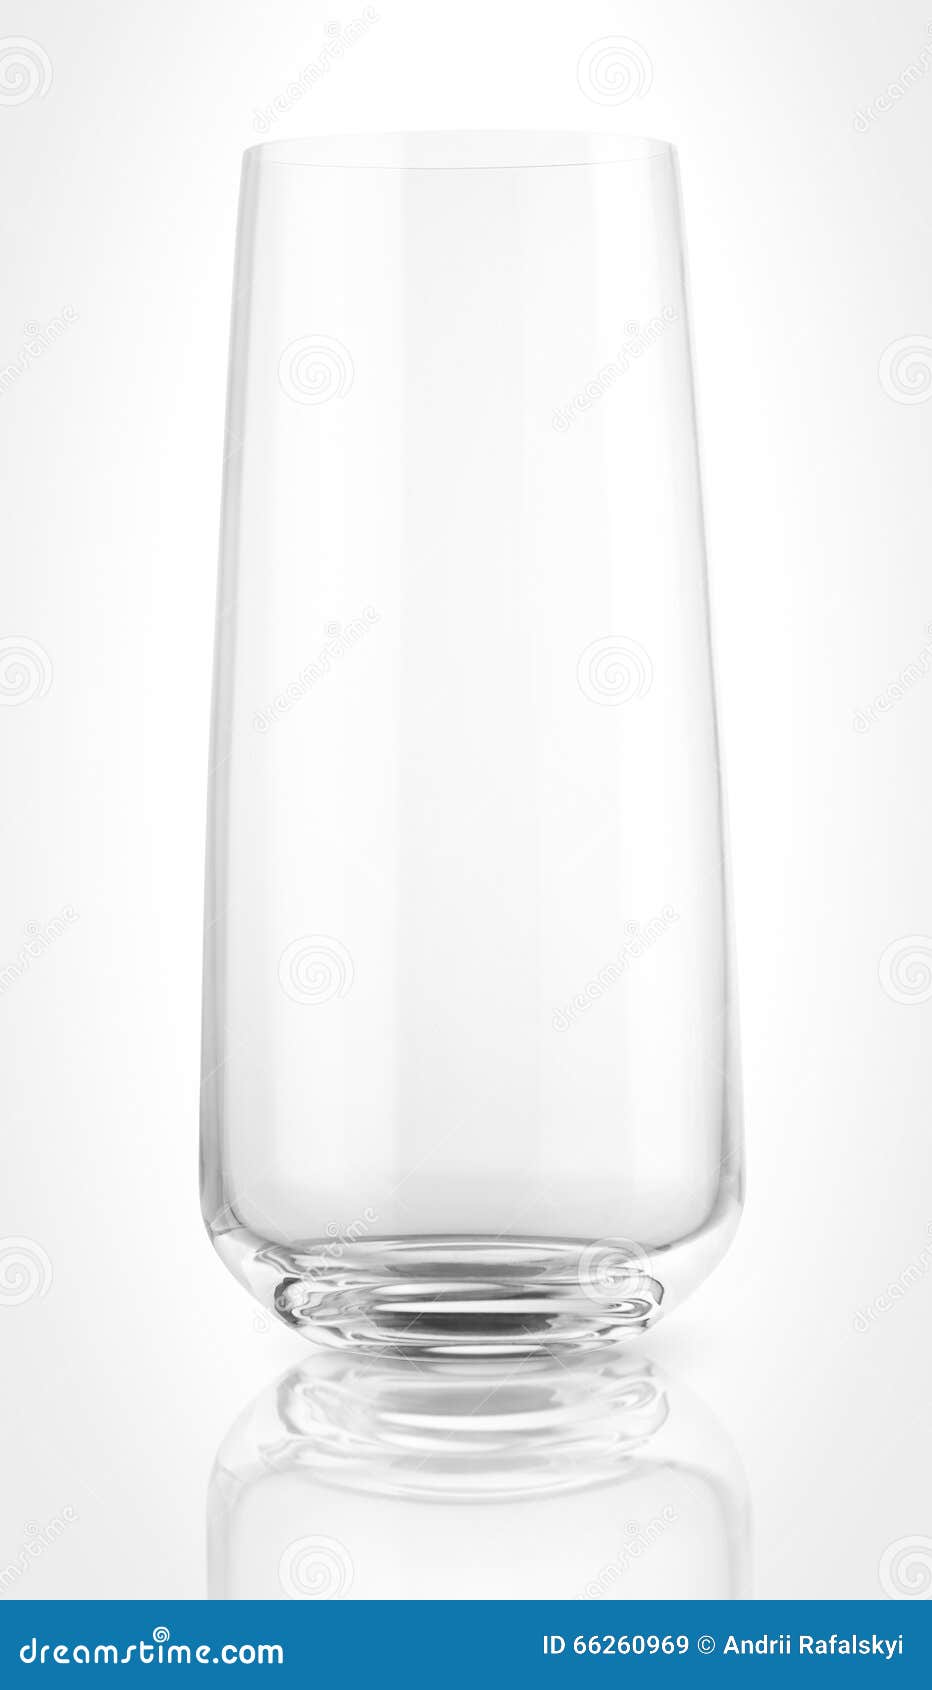 https://thumbs.dreamstime.com/z/empty-drinking-glass-isolated-white-background-reflection-including-clipping-path-66260969.jpg